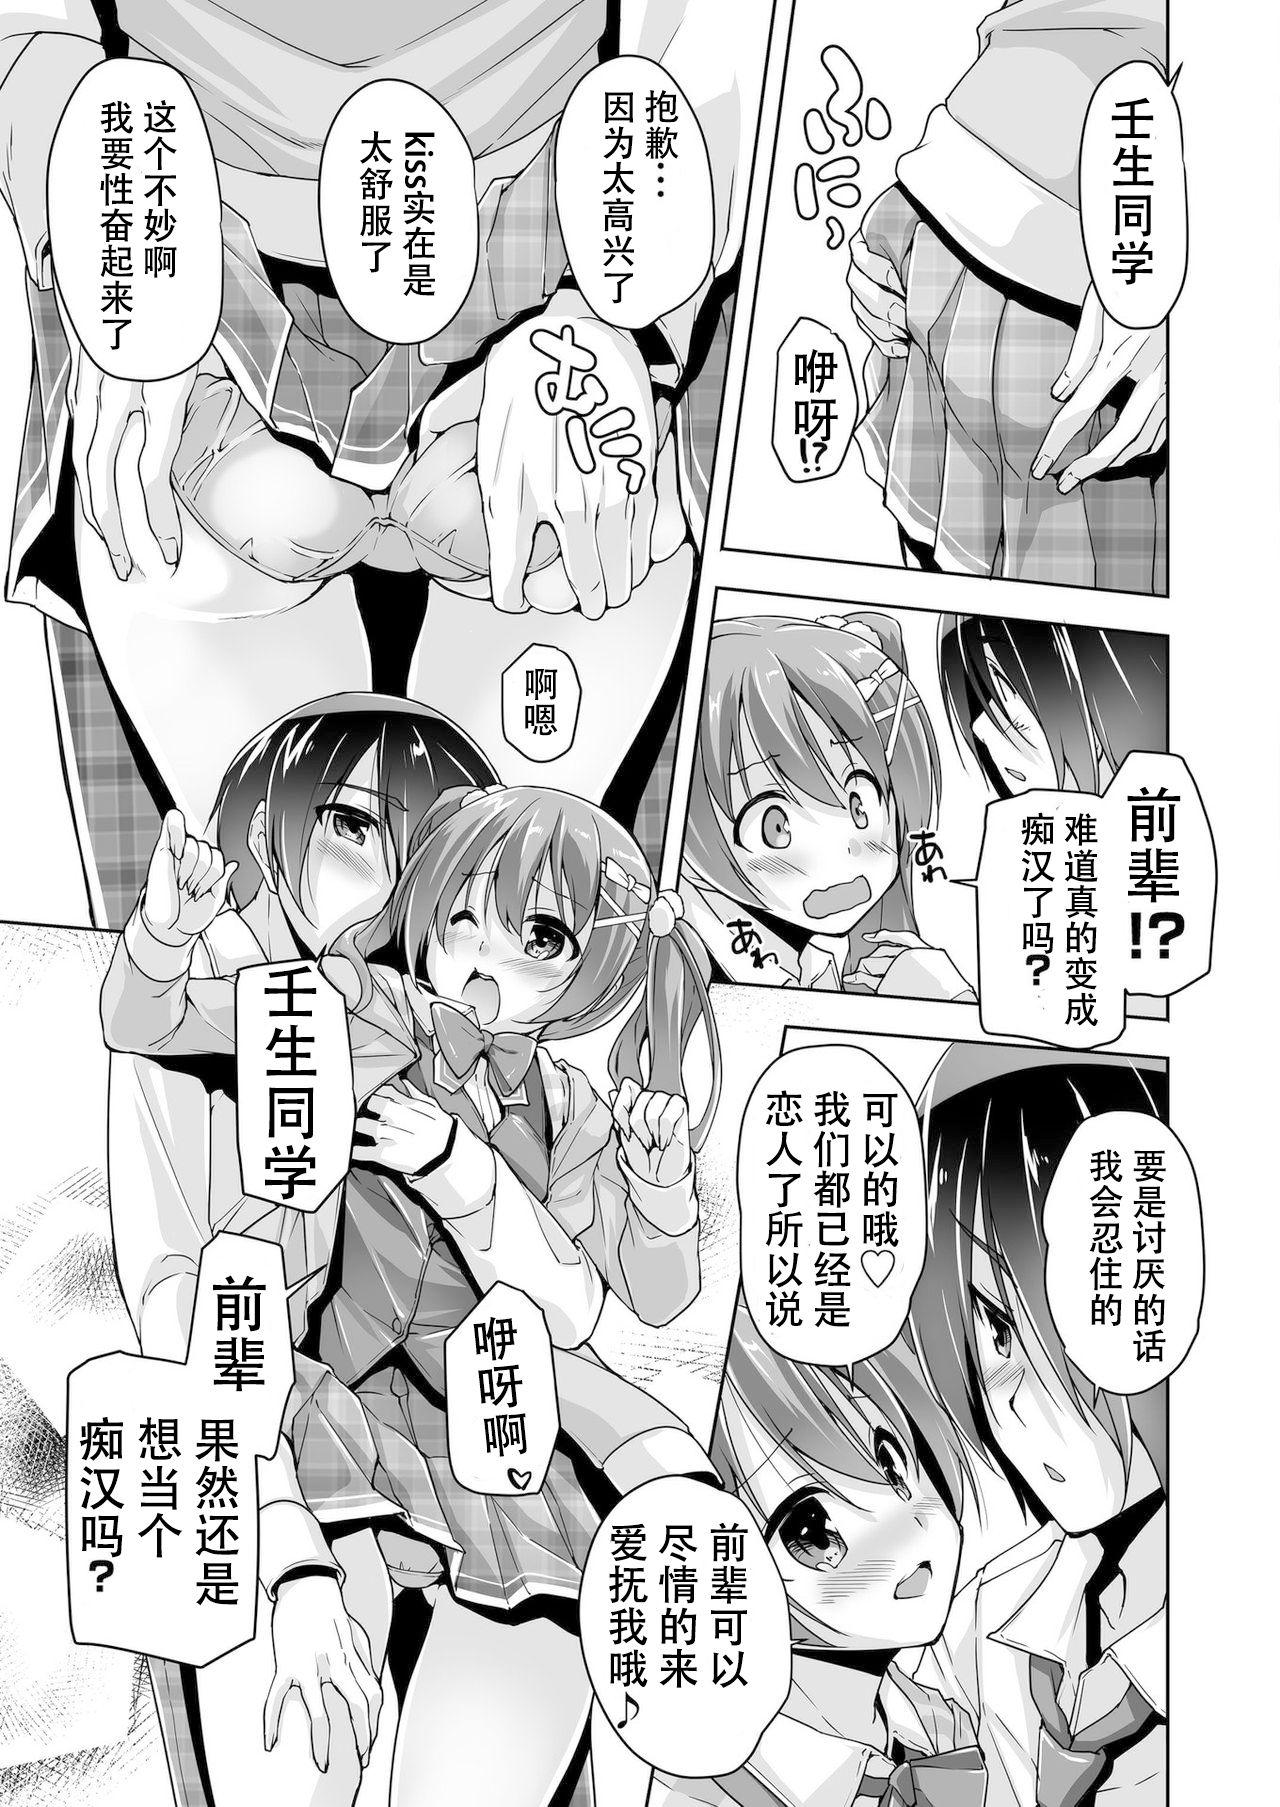 Wild Chisaki to chikan play de hatsu H! ? - Riddle joker Soapy - Page 11